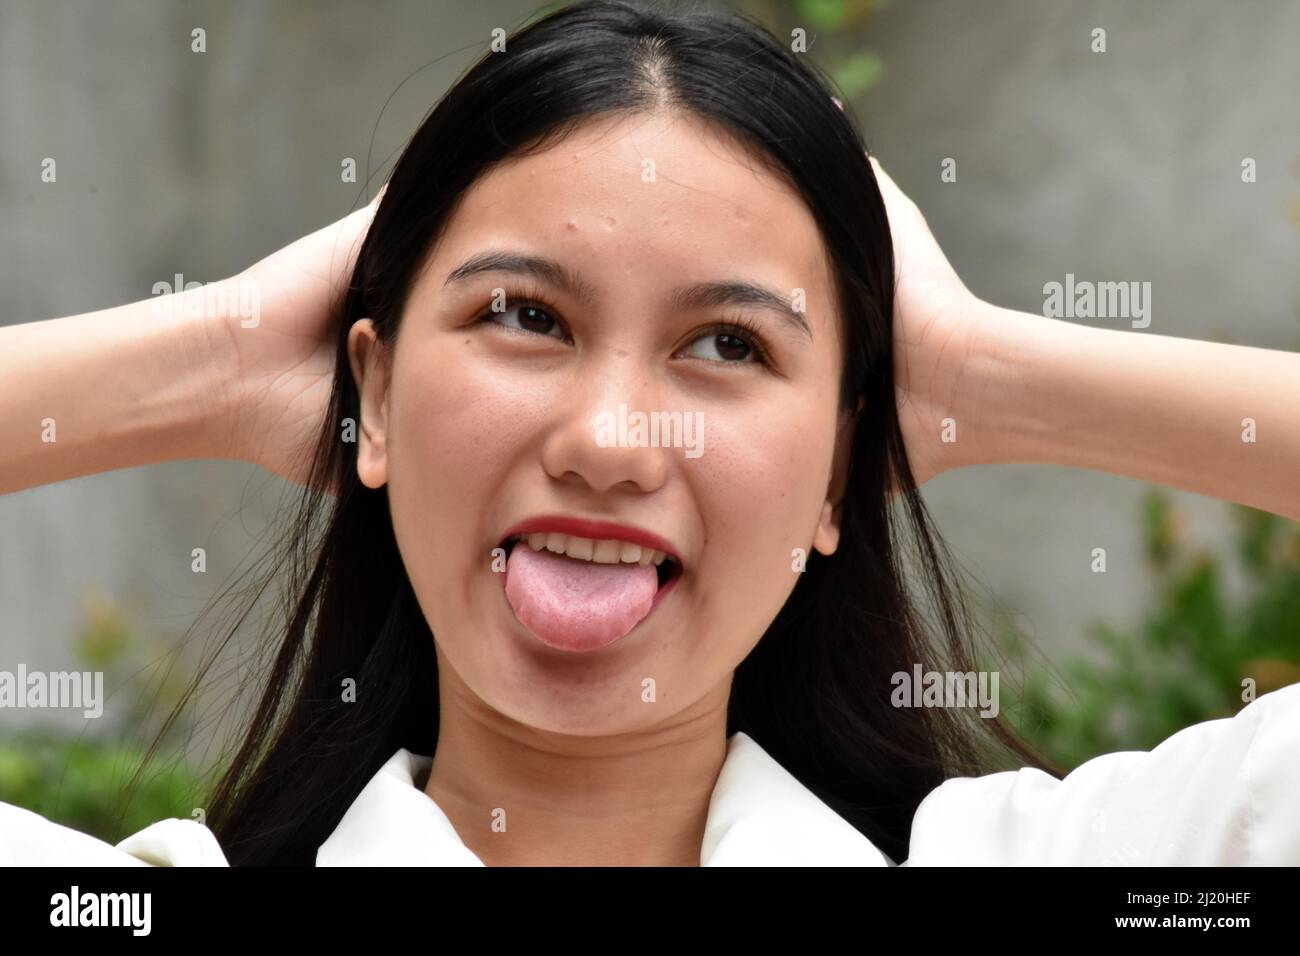 A Stressed Anxious Asian Woman Stock Photo